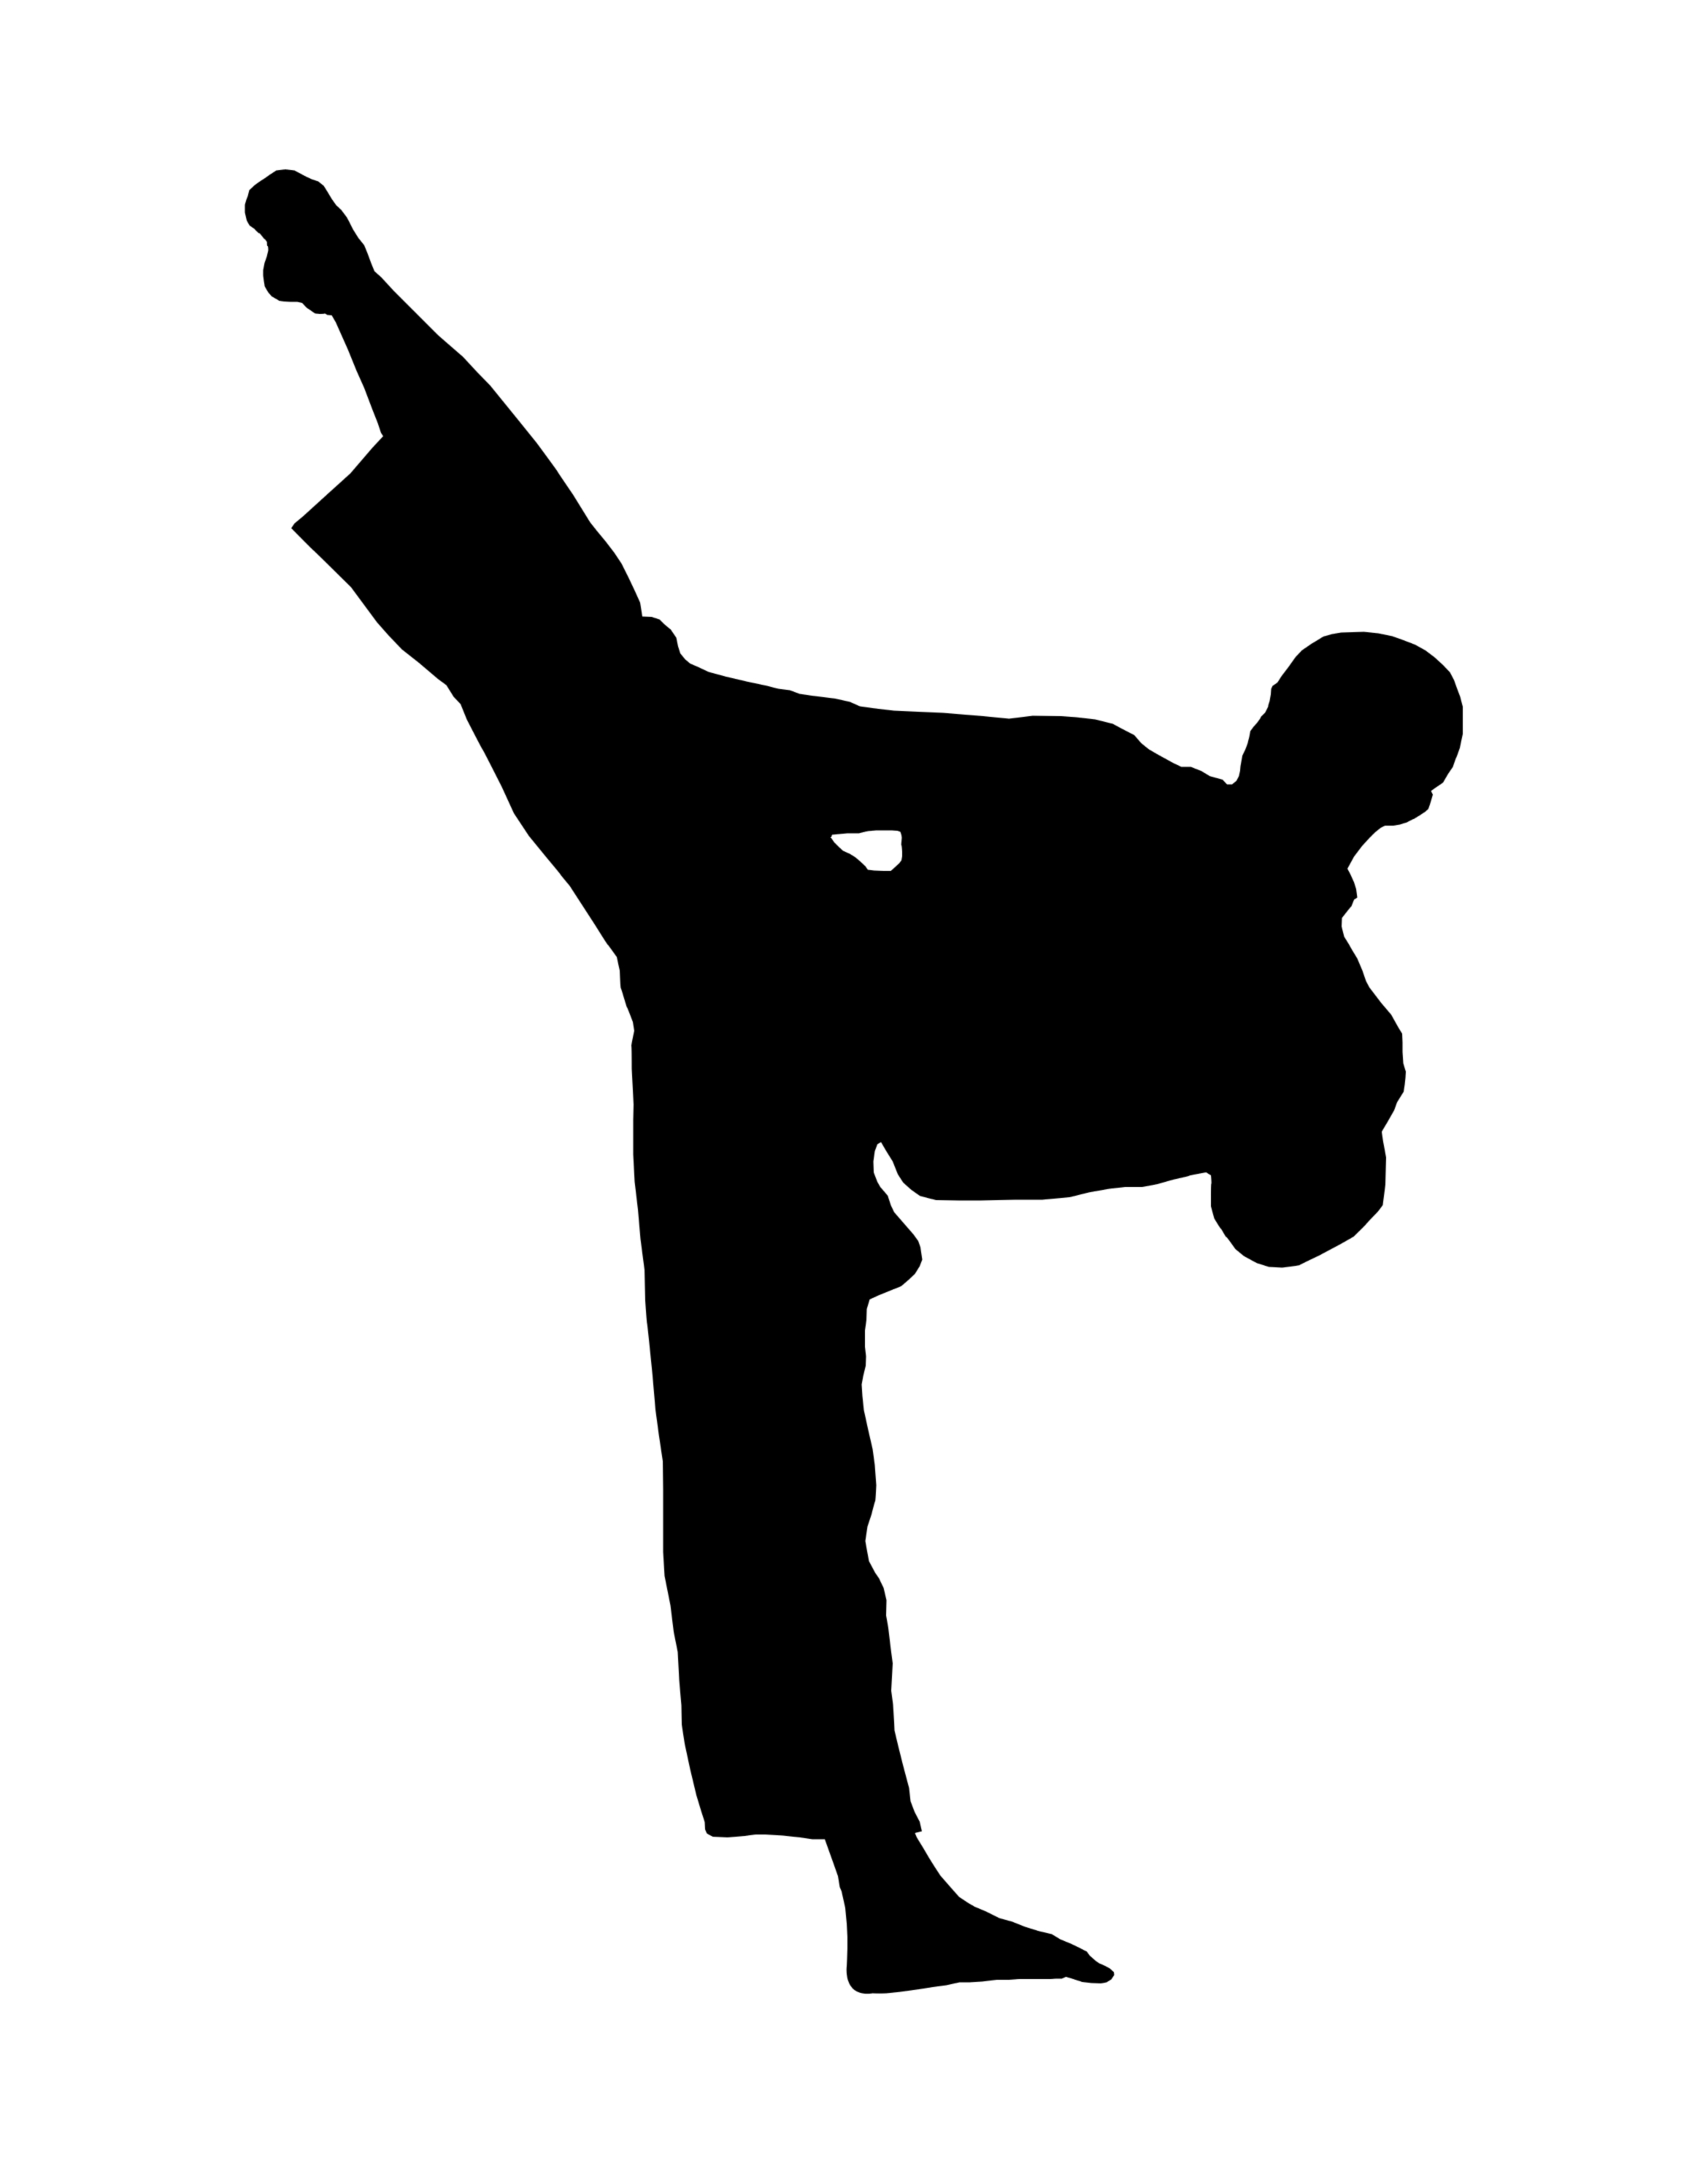 Free Karate Clipart Black And White, Download Free Clip Art.